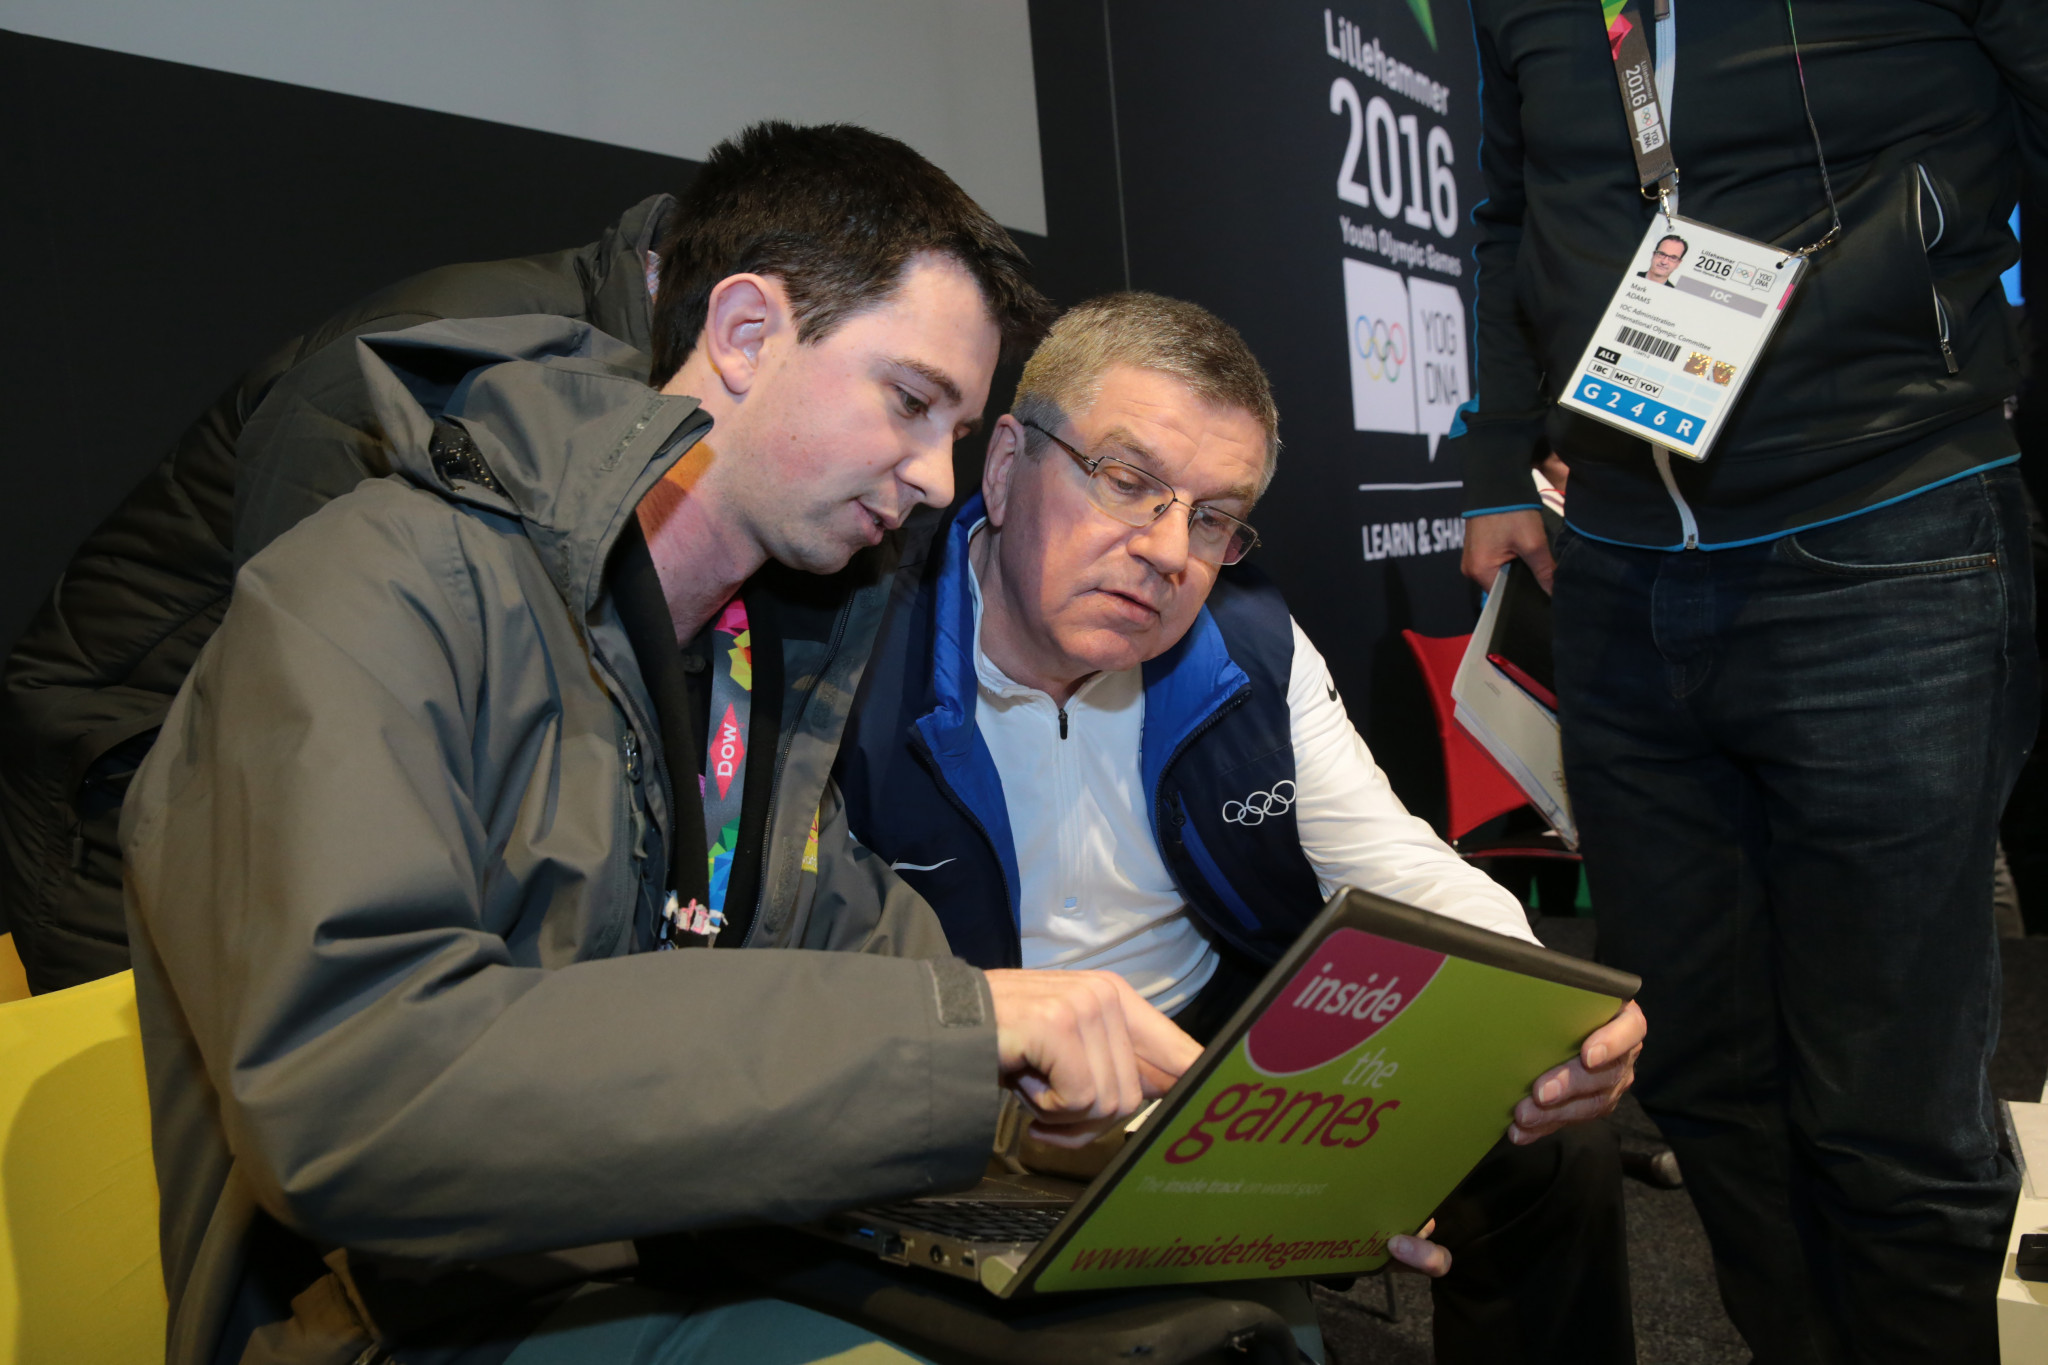 Debating suspicions of Russian doping at Sochi 2014 with Thomas Bach in Lillehammer in February 2016 ©IOC/Ian Jones